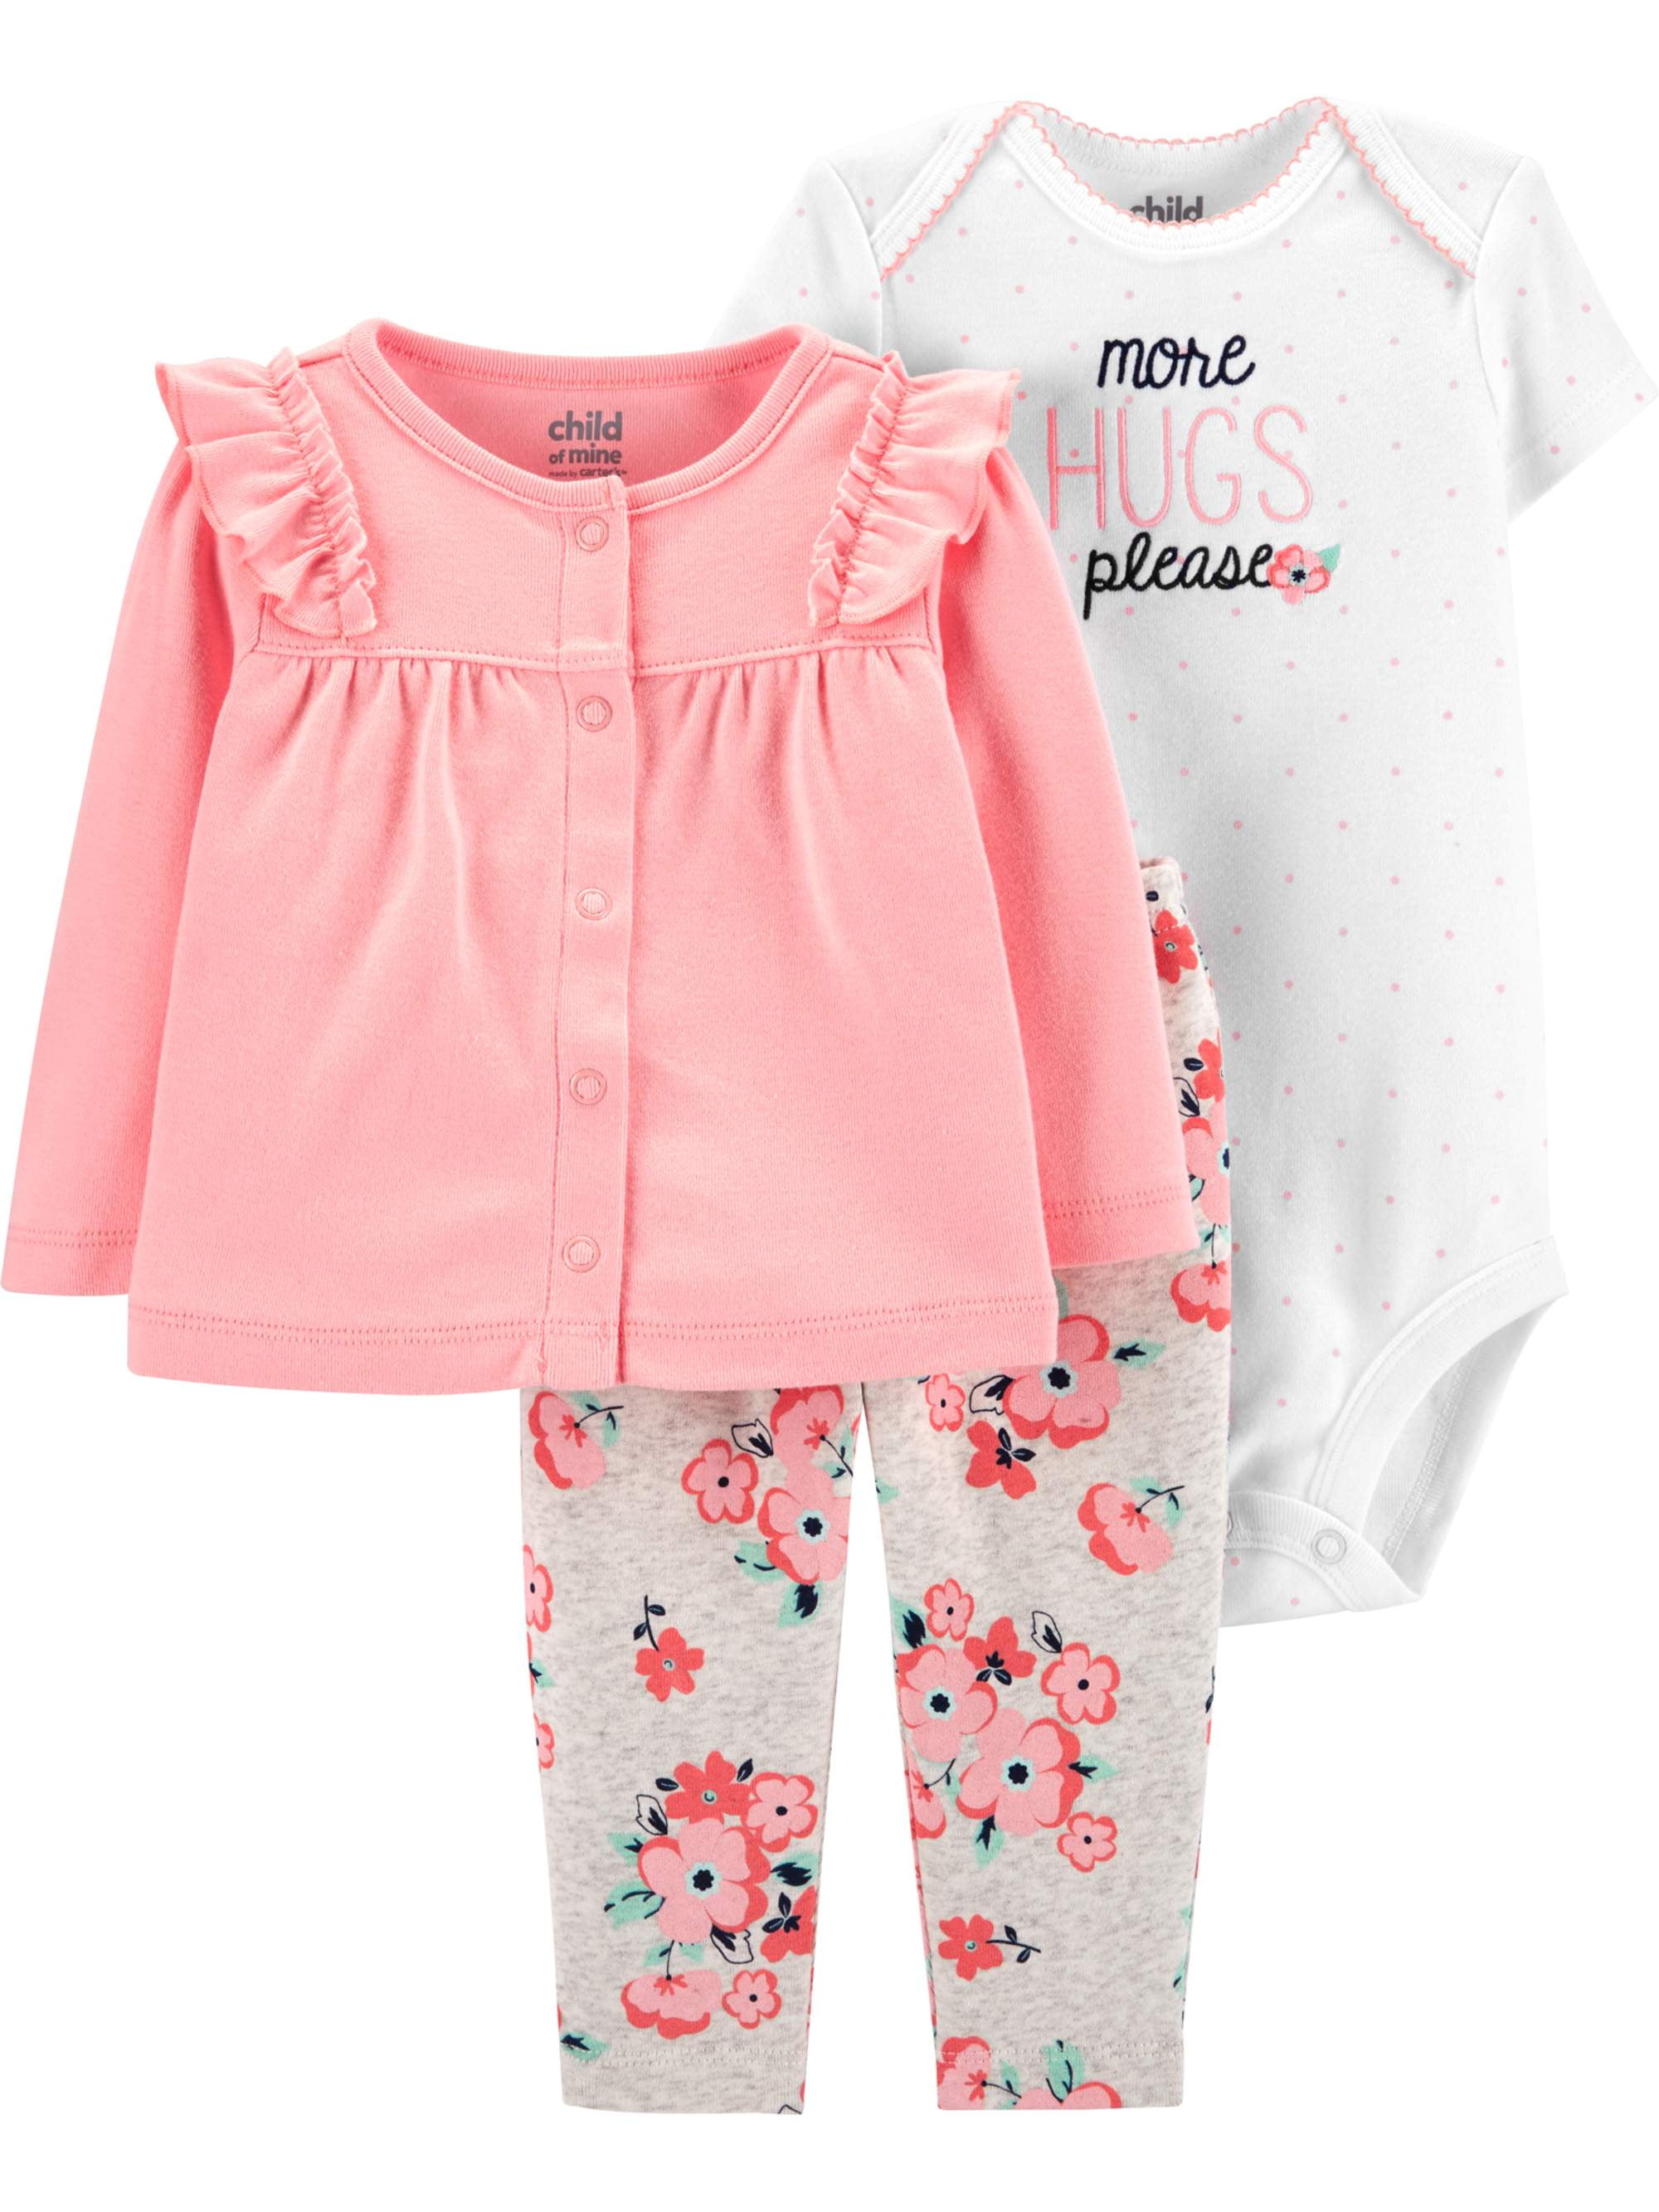 carters outfit sets